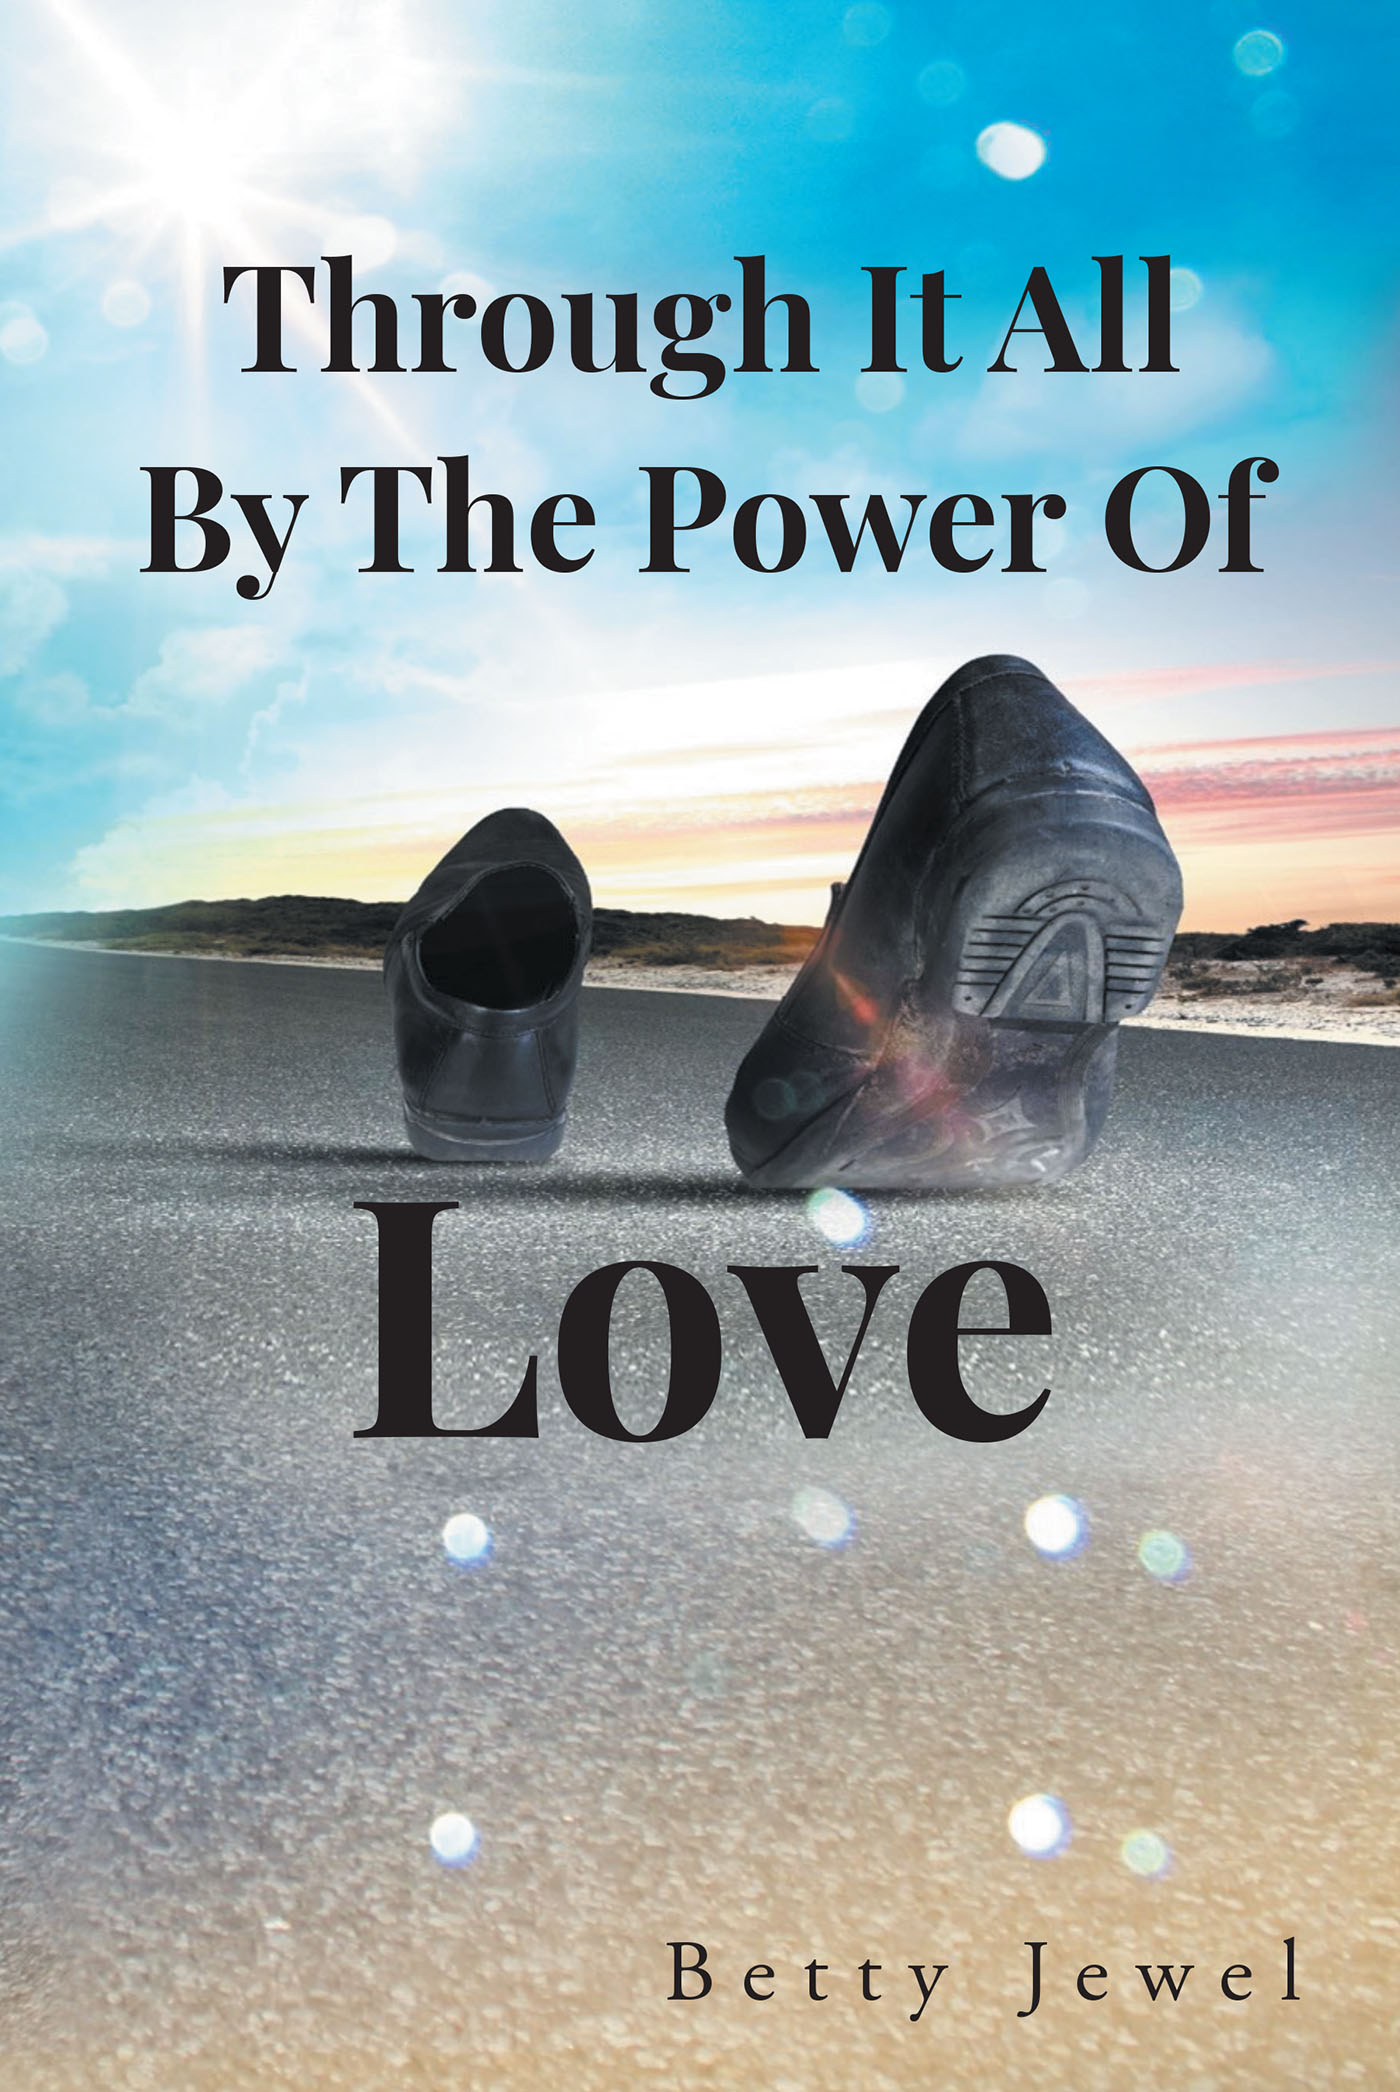 Betty Jewel's New Book 'Through It All By The Power Of Love' is a  Compelling Nonfiction Novel That Shares the Author's Difficult Journey  Through Life